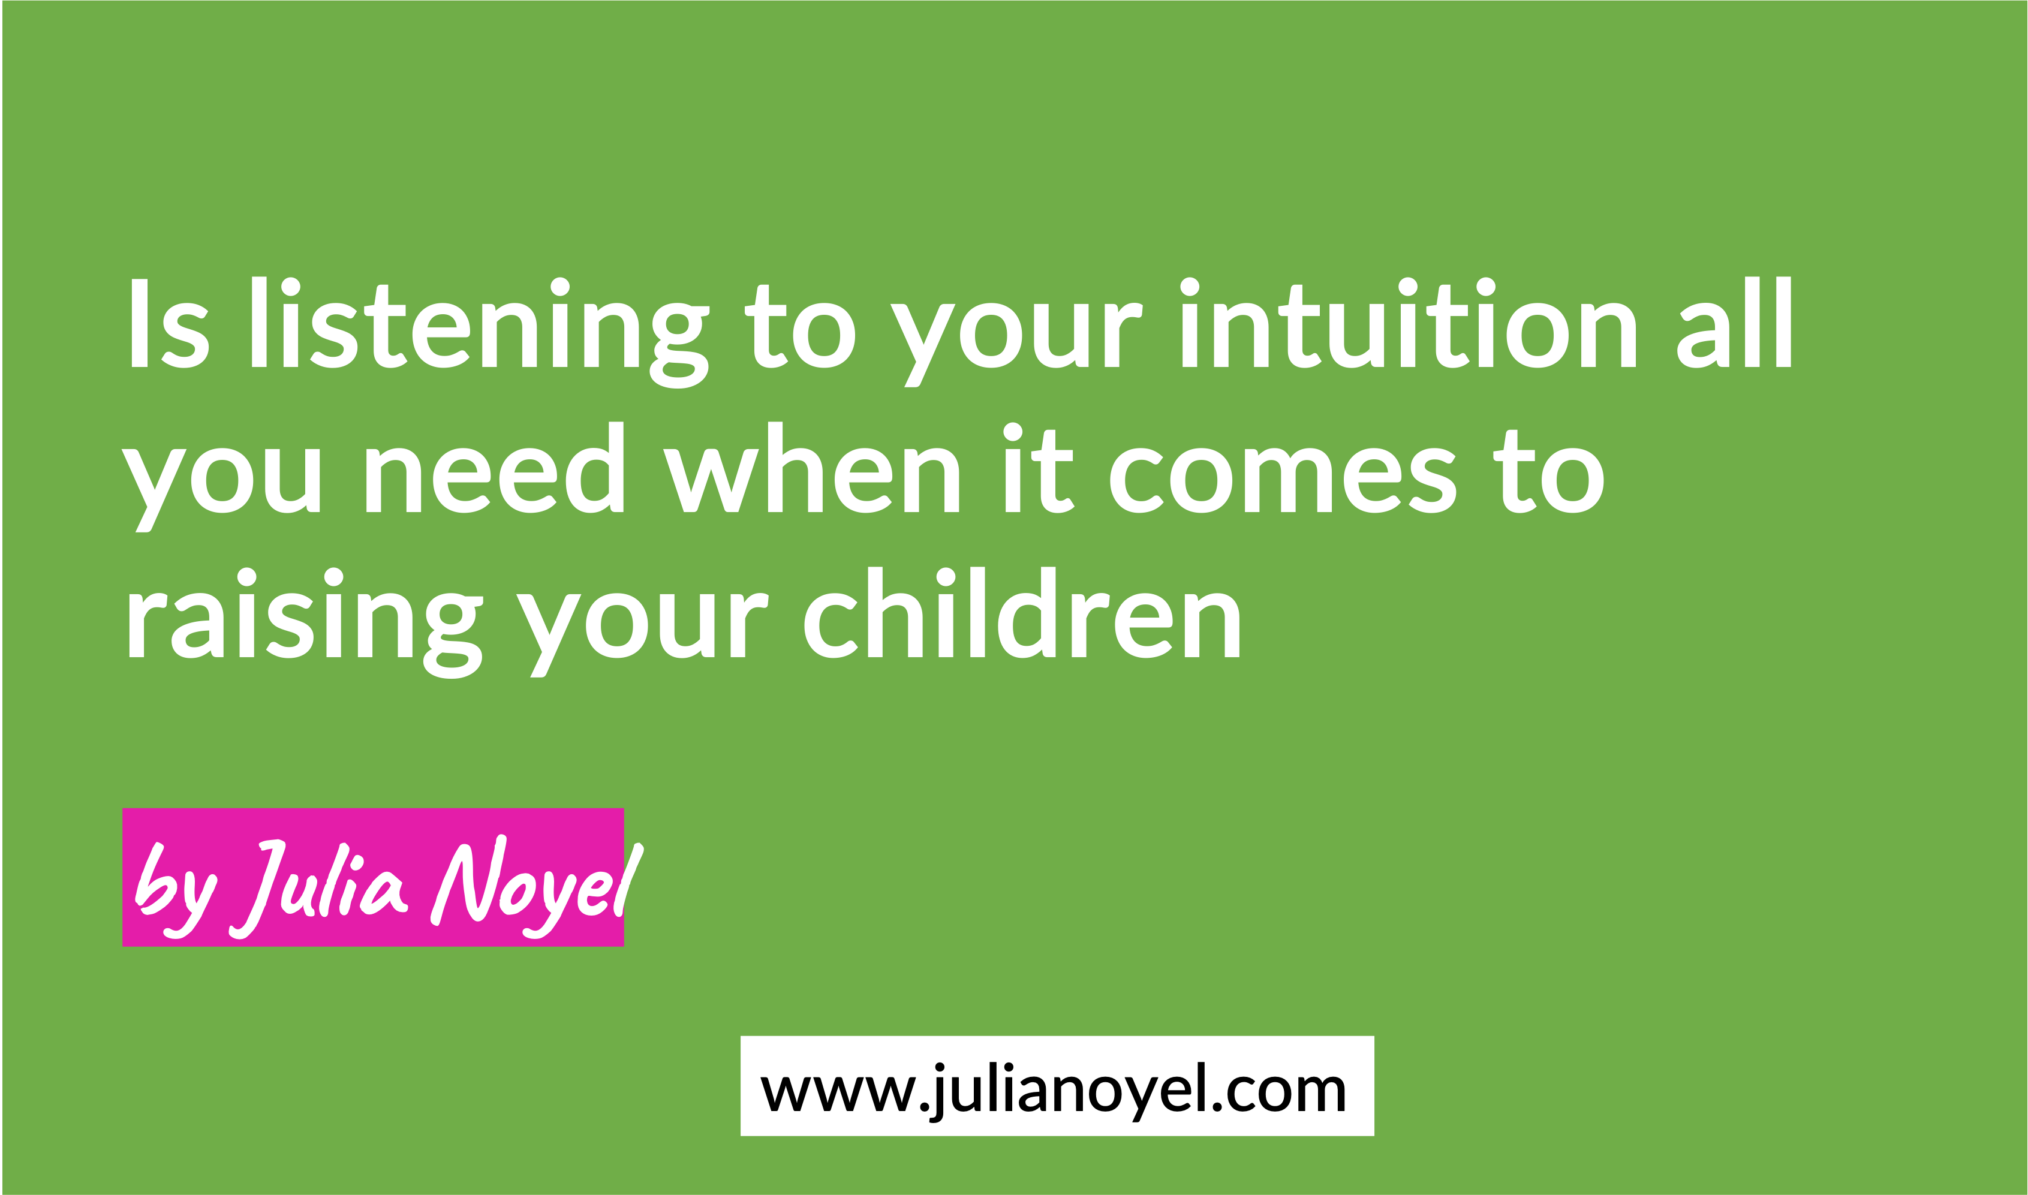 Is listening to your intuition all you need when it comes to raising your children by Julia Noyel 